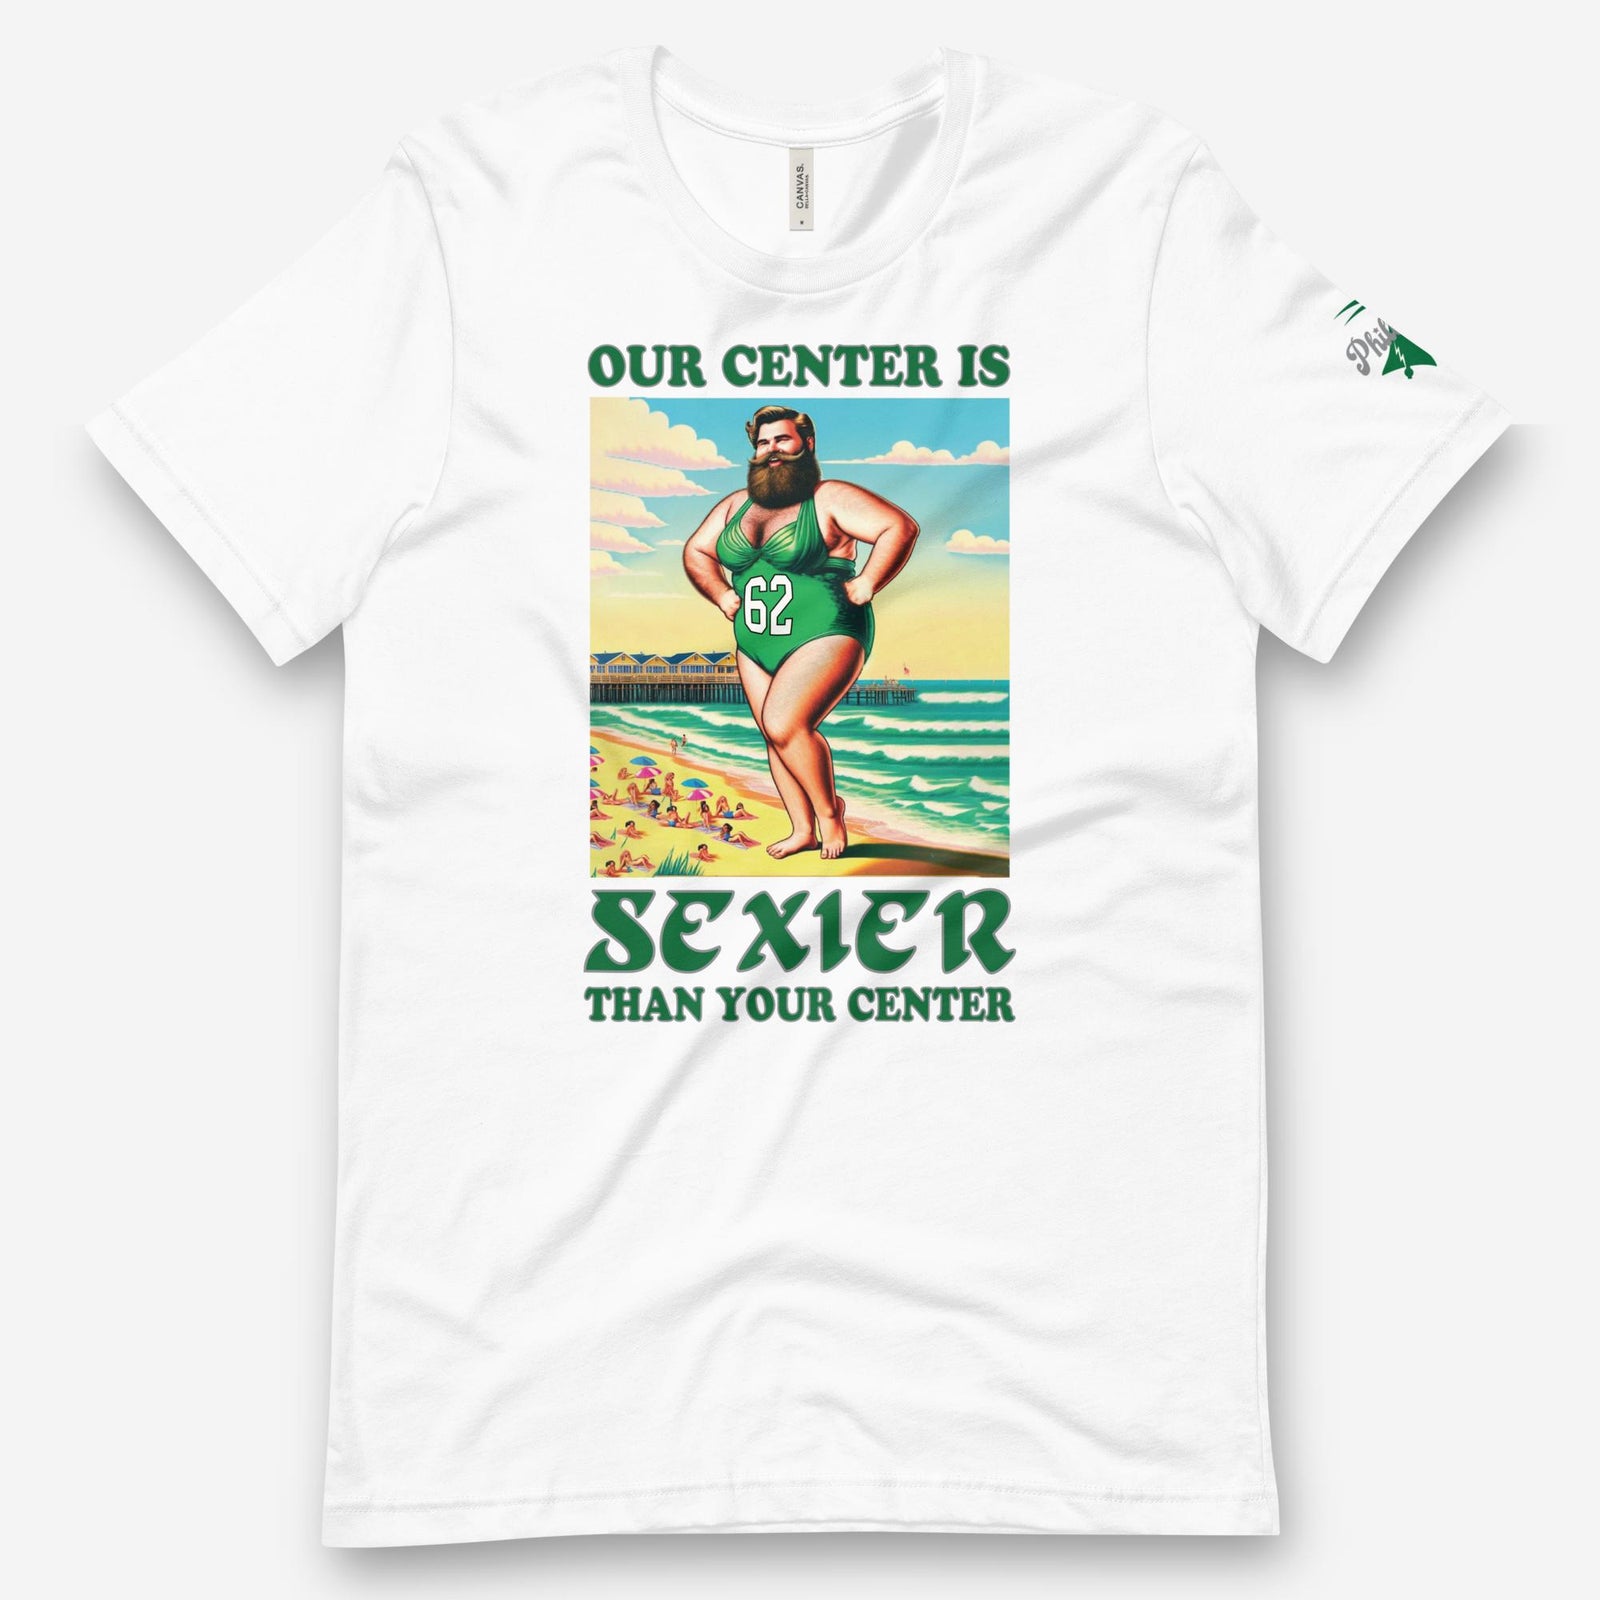 "Our Center Is Sexier Than Your Center" Tee